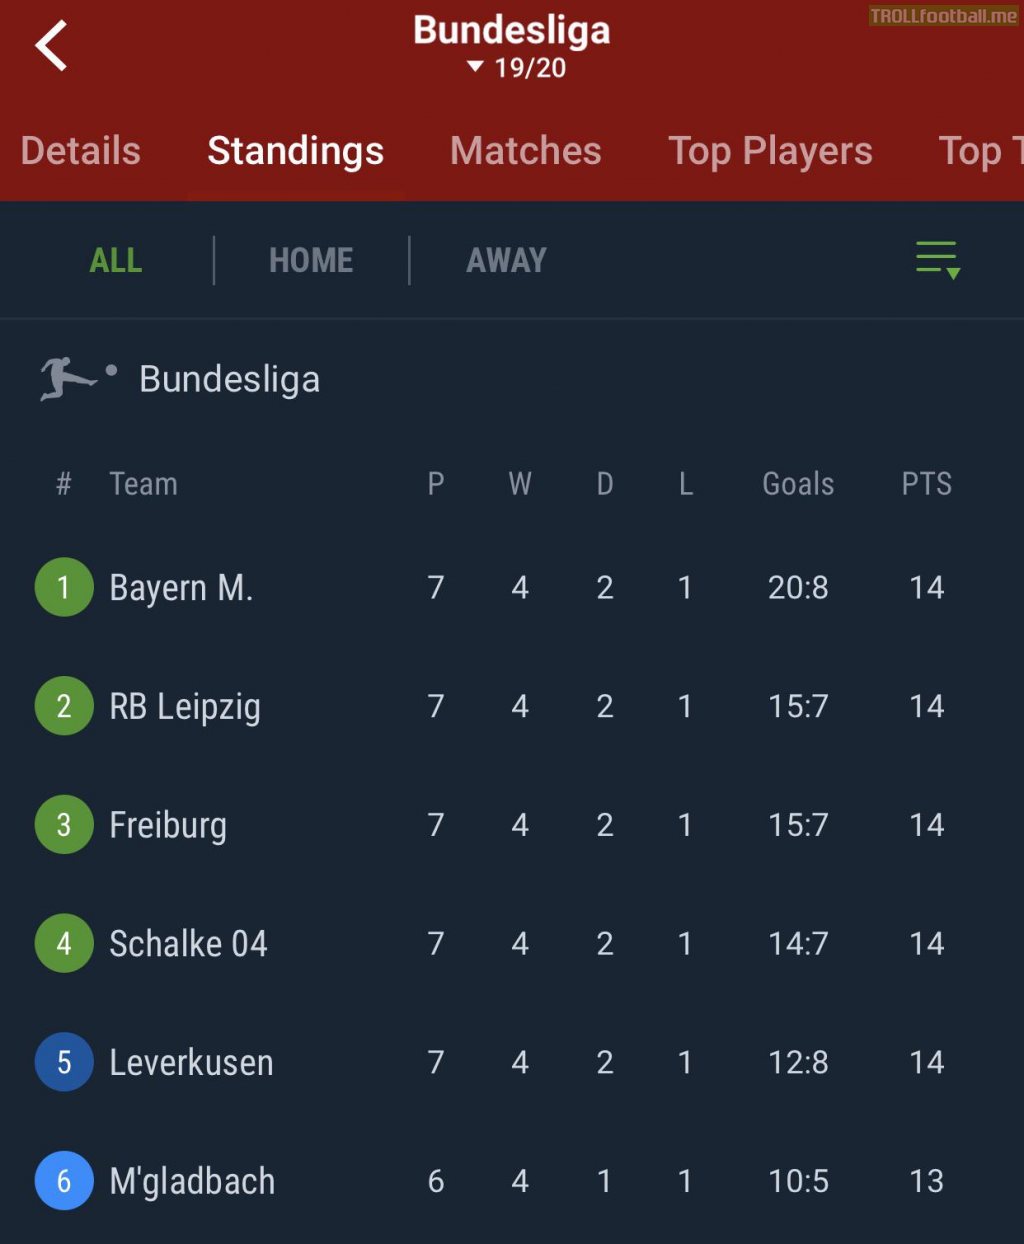 If Borussia Monchengladbach draw against Augsburg tomorrow, there will be a 6-way tie for first place in the Bundesliga